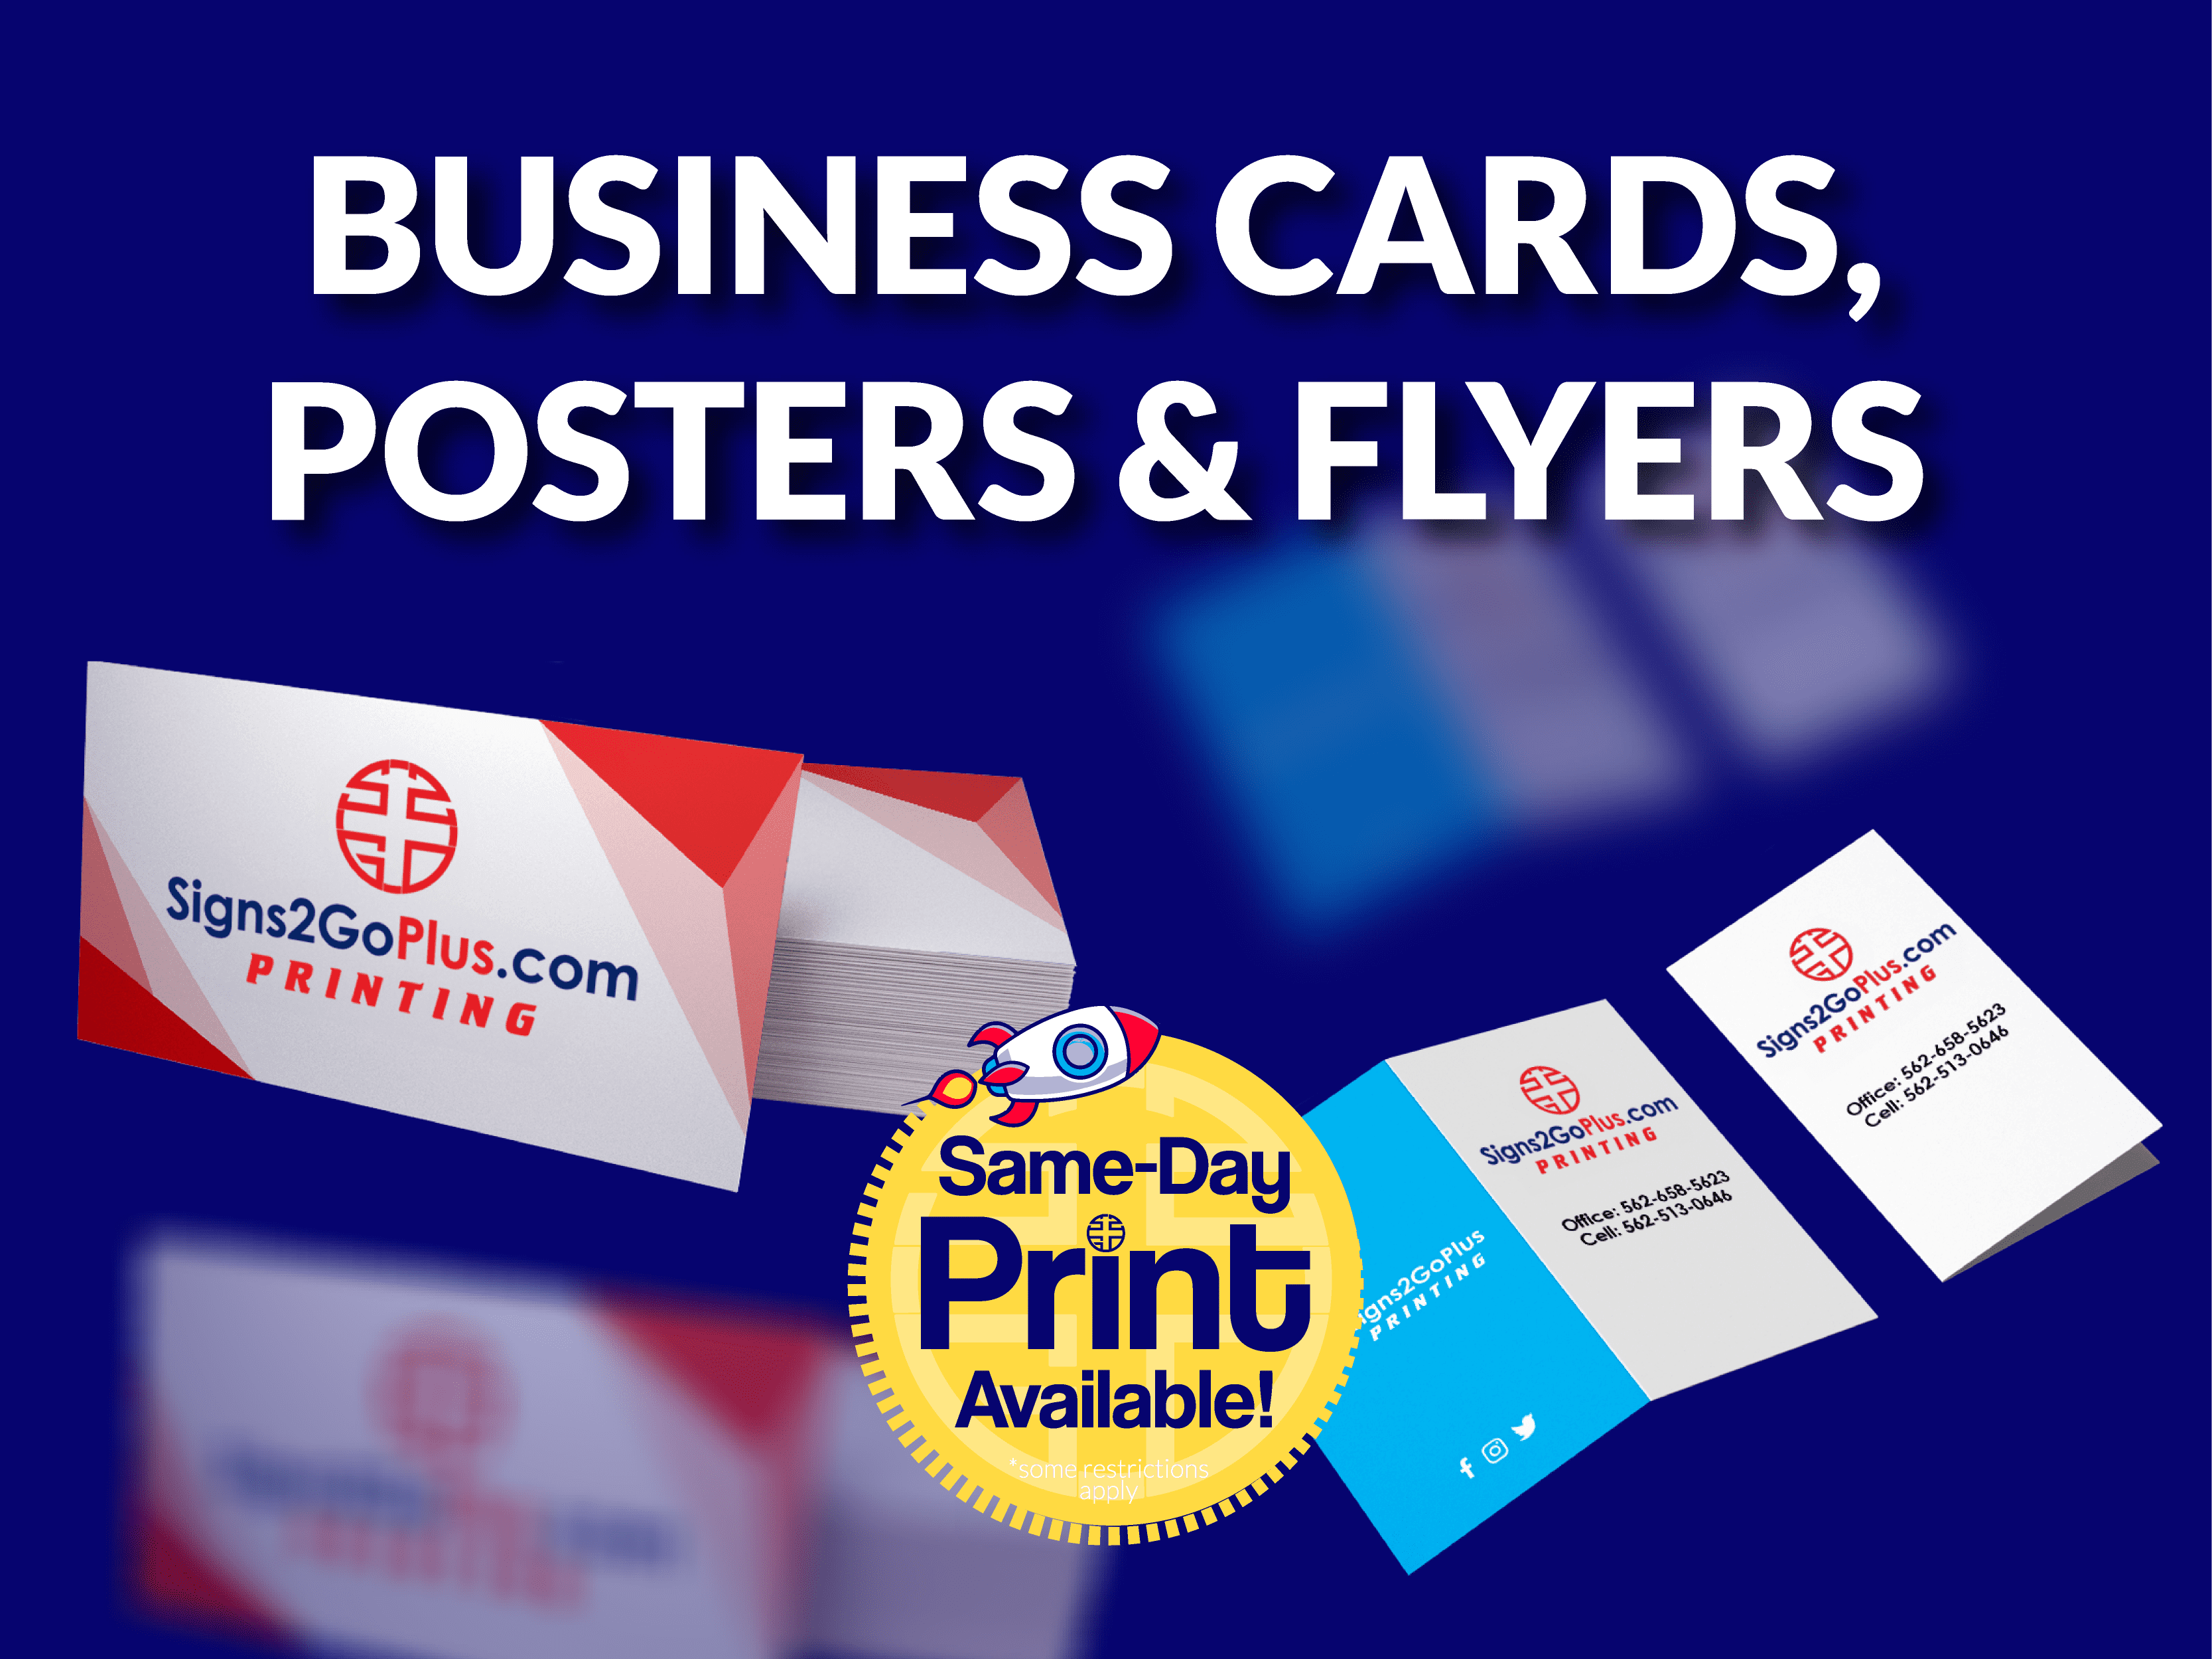 This image refers to our Business Cards, Posters & Flyers promotion with Same Day Print Available. To learn more about Business Cards, Posters & Flyers, feel free to check out the 'Products' section in the menu. Happy exploring!